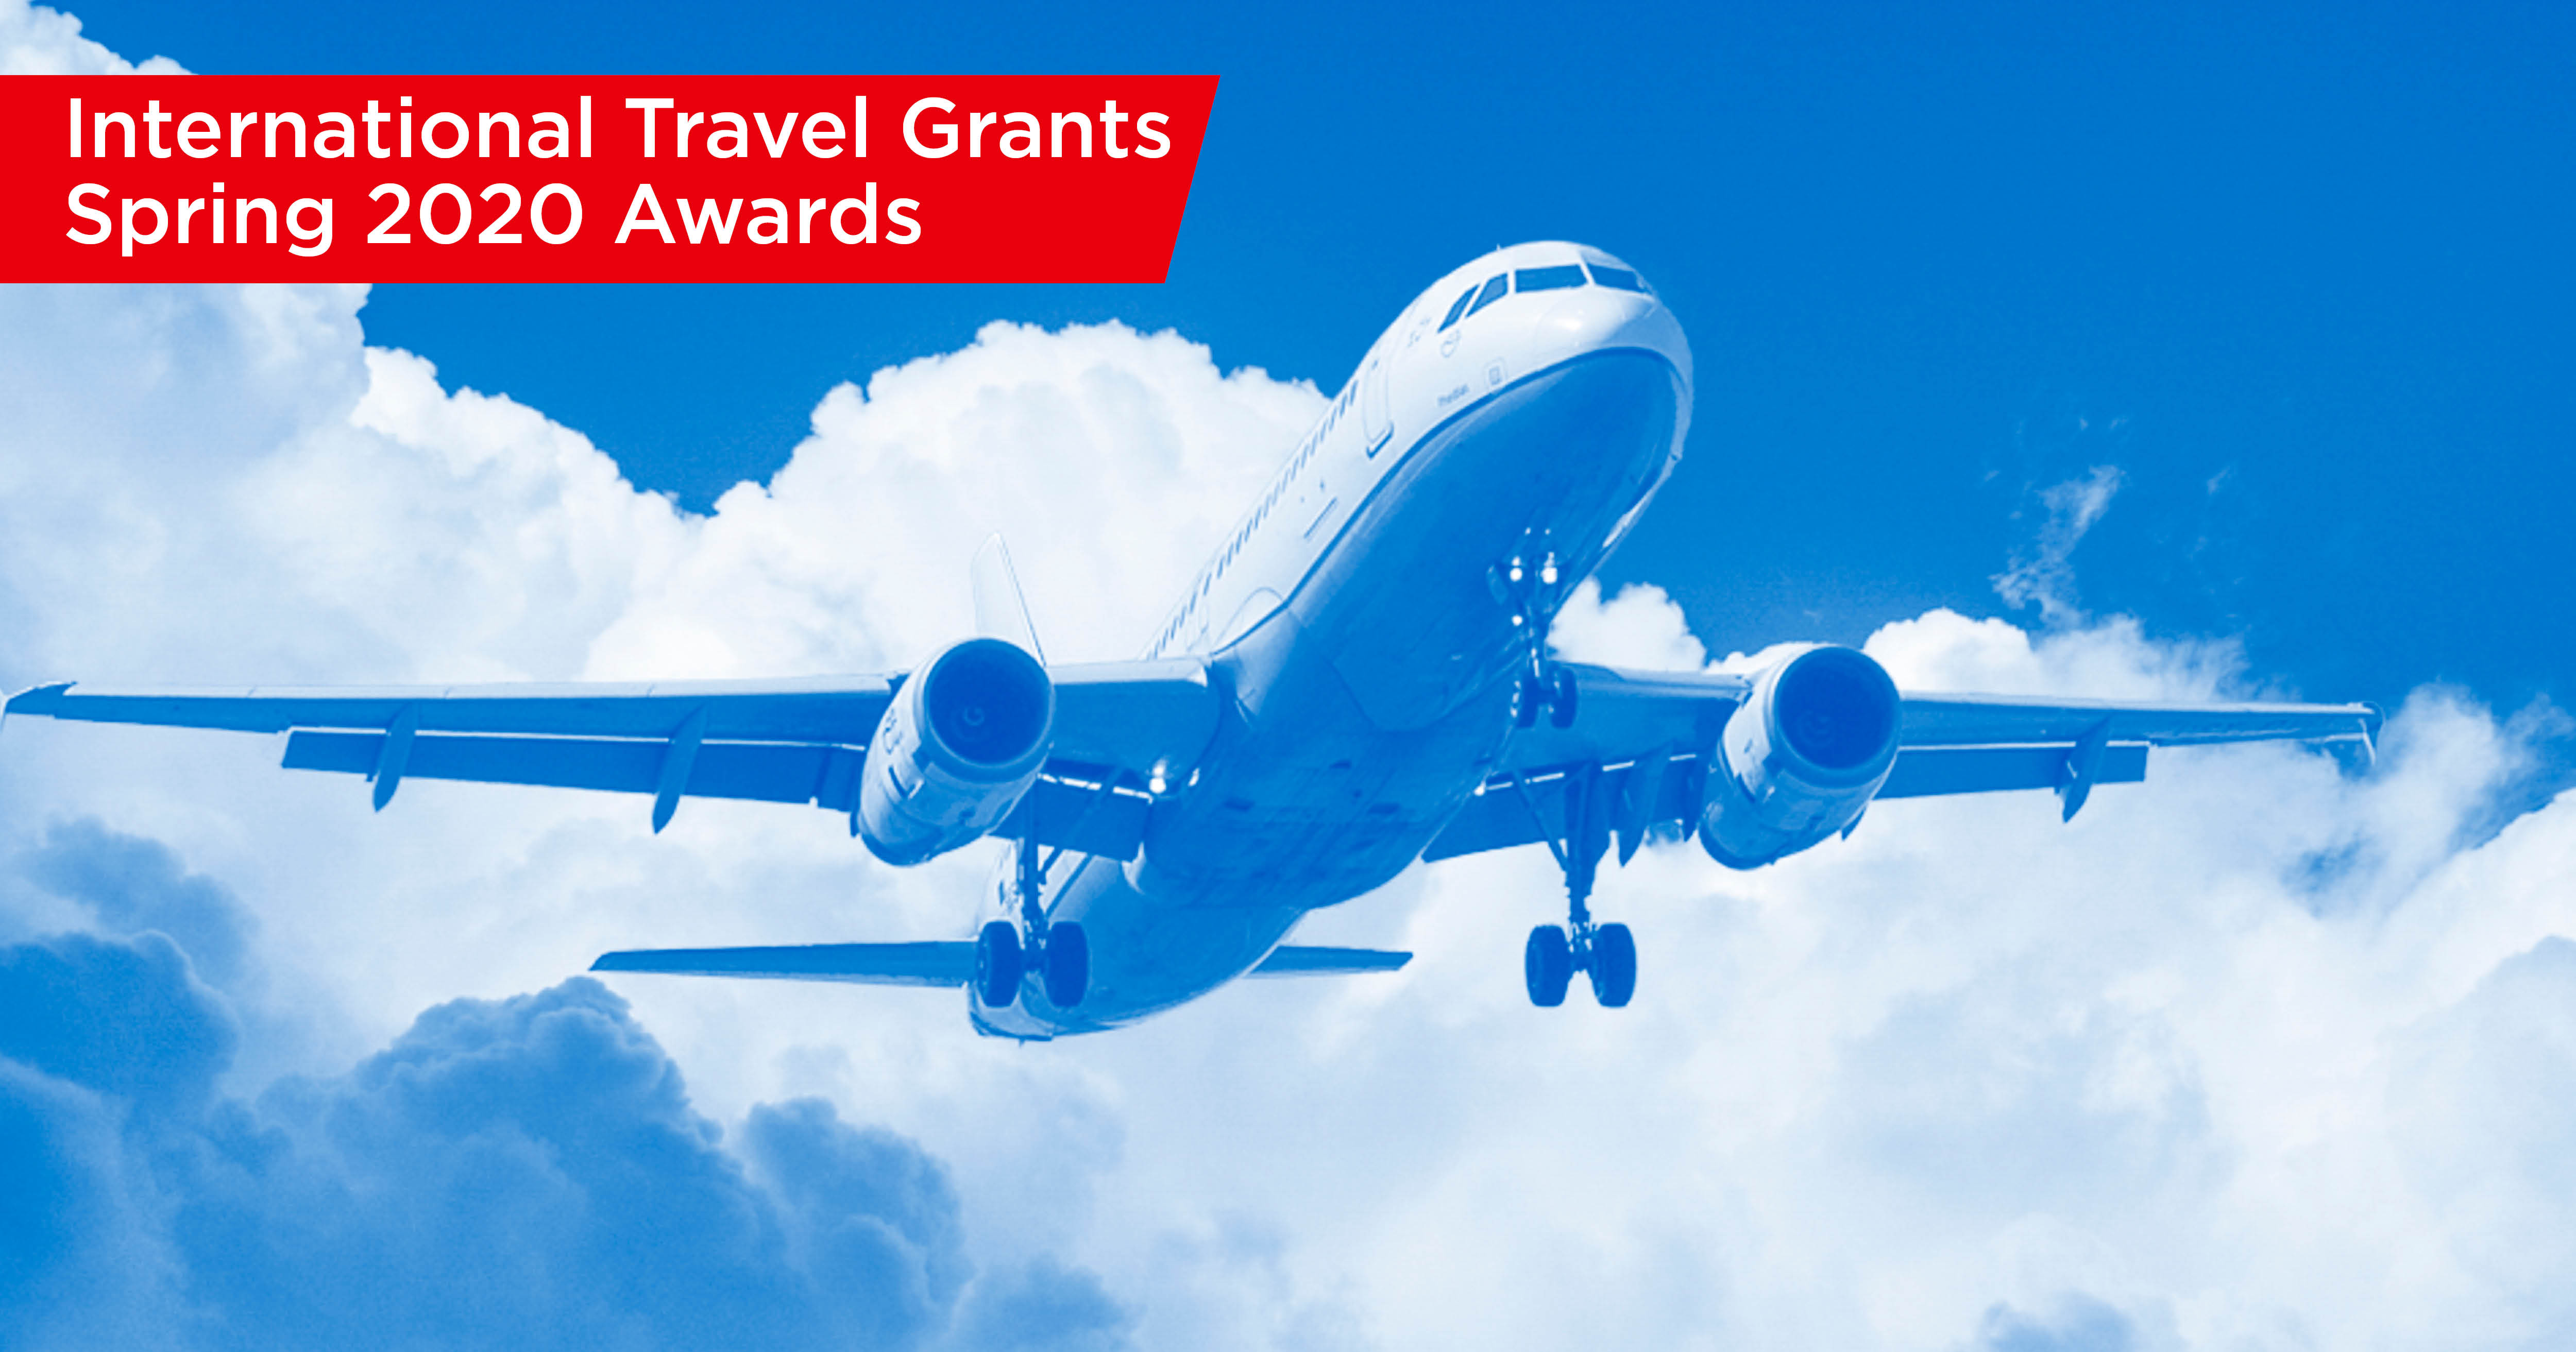 Graphic of airplane with words International Travel Grants Spring 2020 Awards